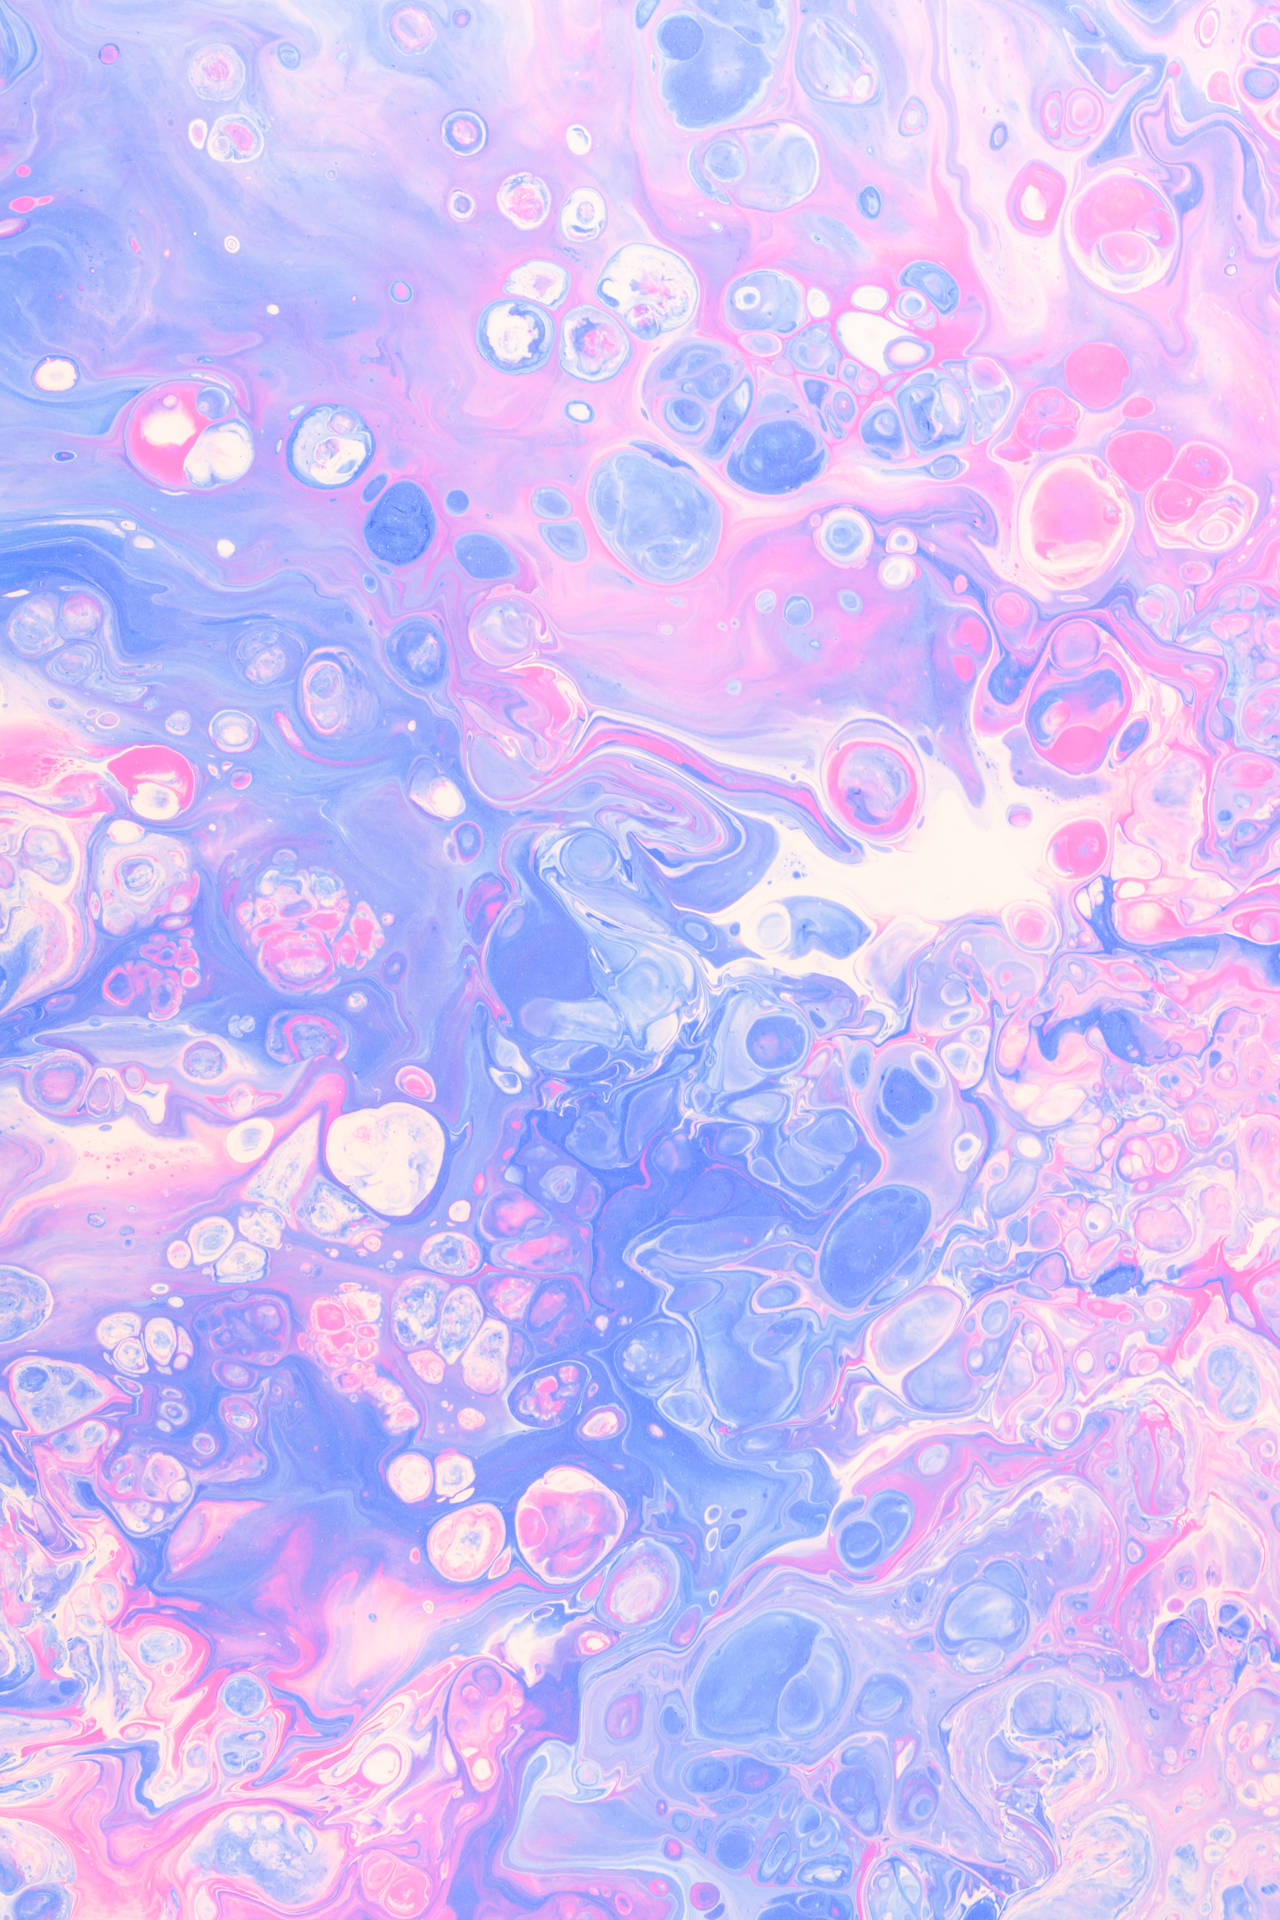 Pastel 4000X6000 Wallpaper and Background Image